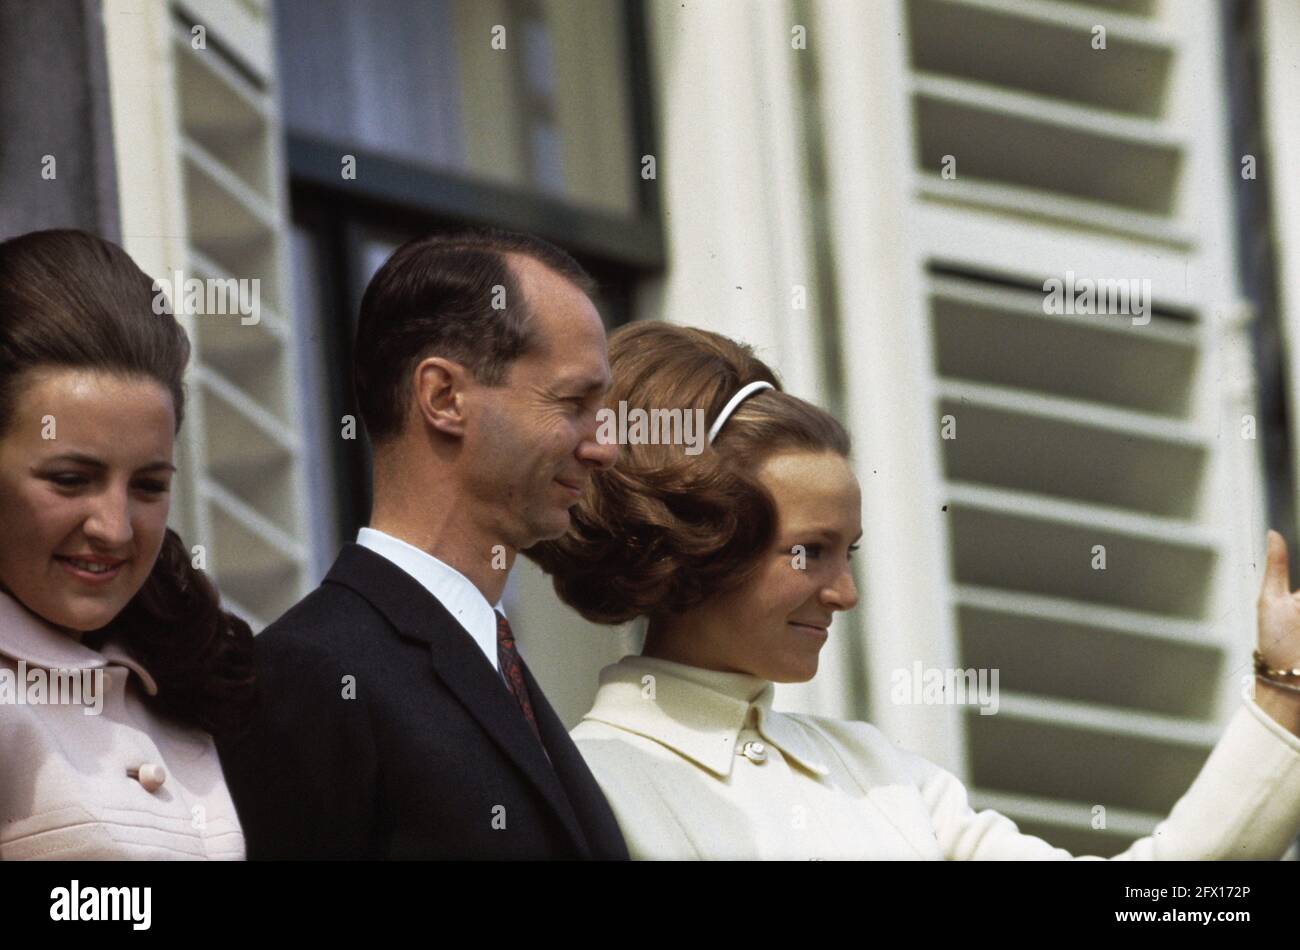 Koninginnedag; nr. 25, mr. Pieter van Vollenhoven and Princess Margriet, nr. 26, 27: Prince Carel Hugo and Princess Irene, 30 April 1969, Koninginnedag, The Netherlands, 20th century press agency photo, news to remember, documentary, historic photography 1945-1990, visual stories, human history of the Twentieth Century, capturing moments in time Stock Photo